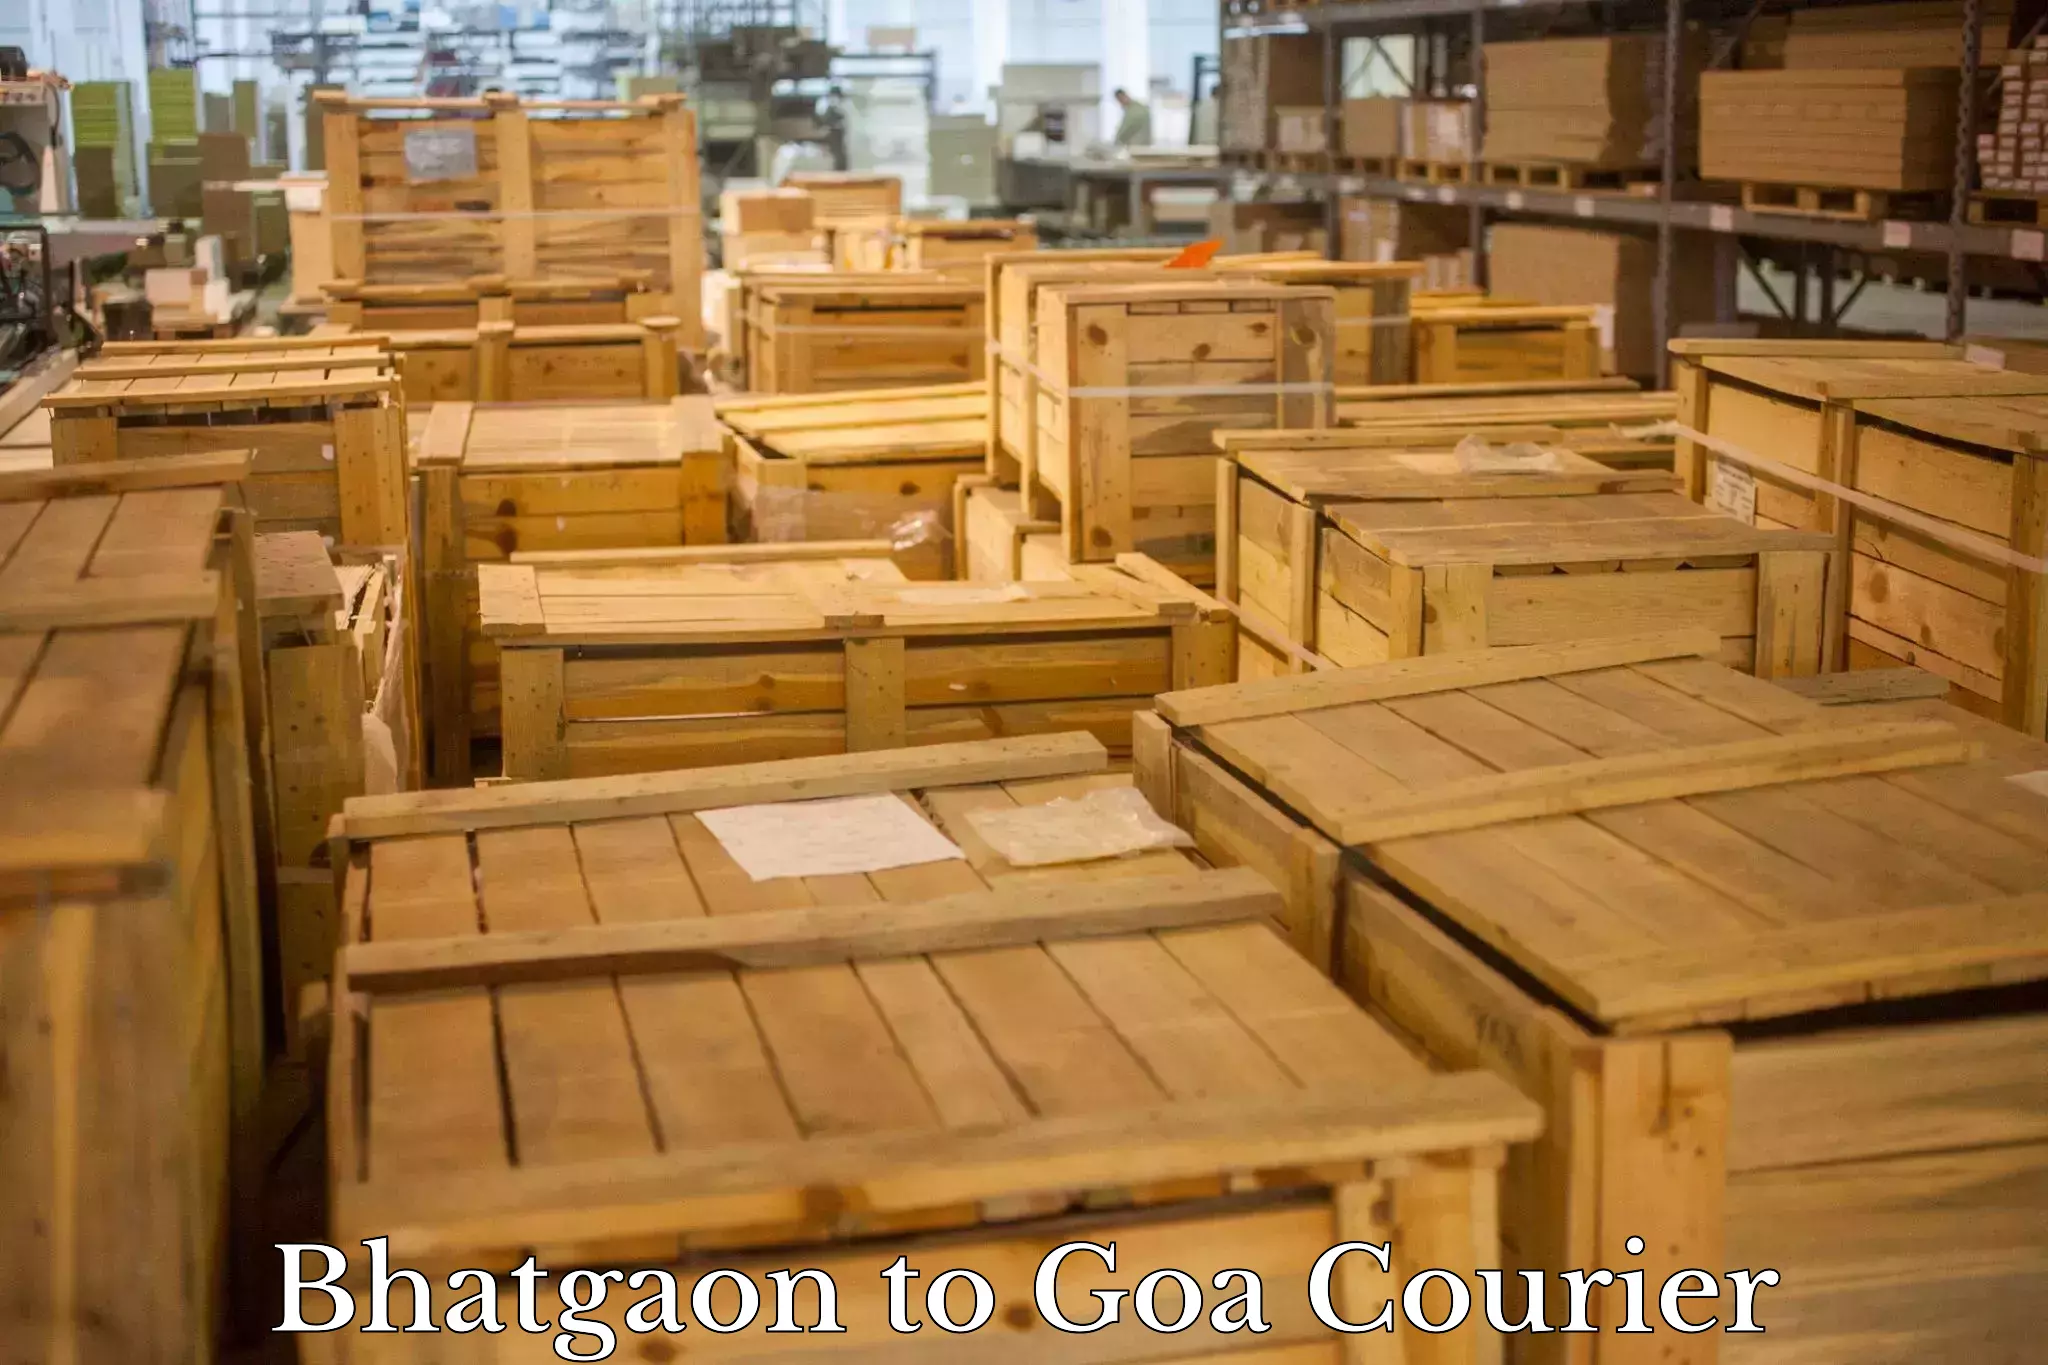 Package delivery network Bhatgaon to Goa